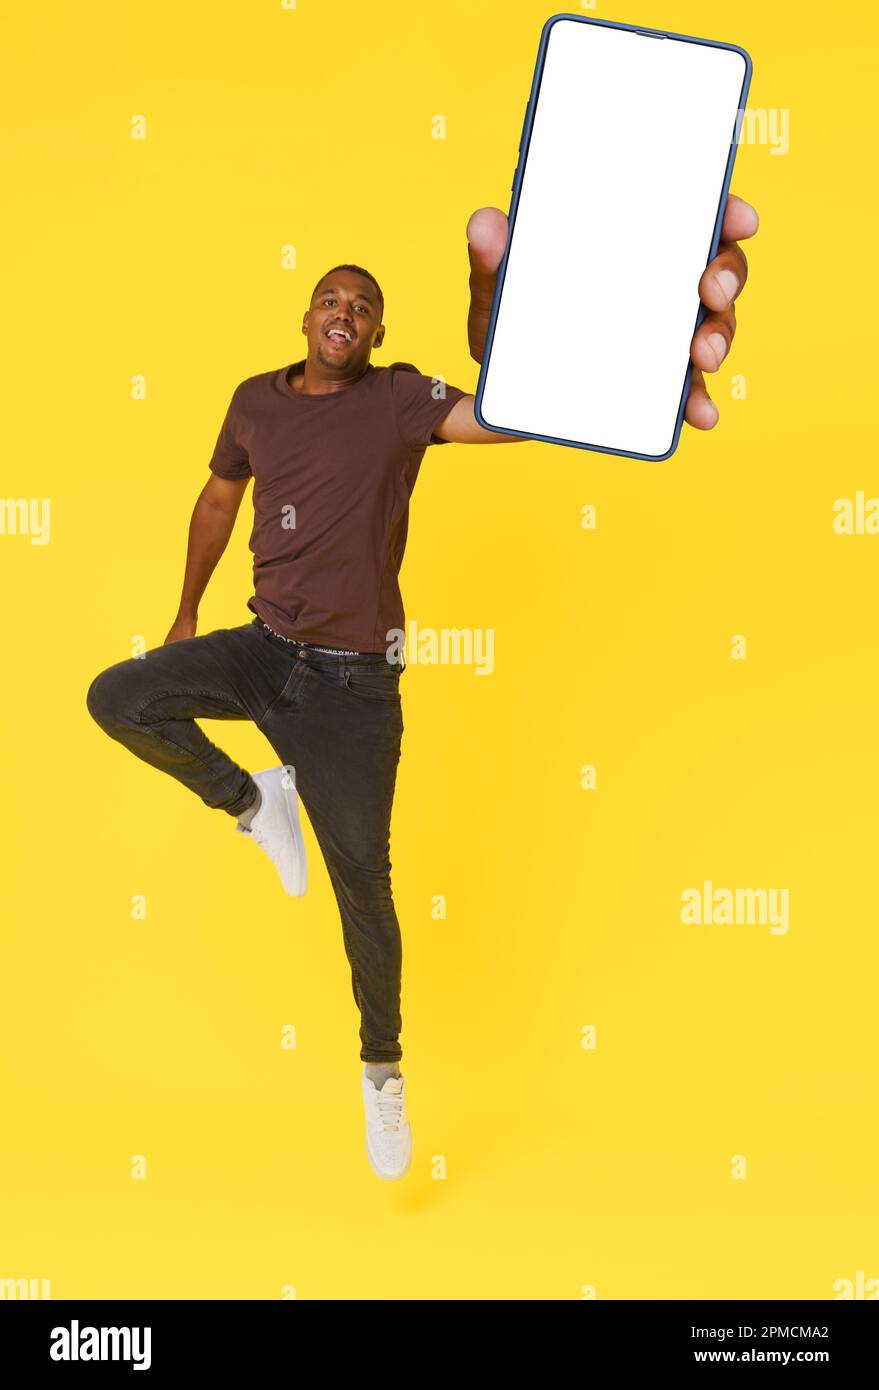 Energetic African American student is captured jumping with mobile phone featuring empty white screen in hand, on yellow background. This image is perfect for product placement or advertising concepts. High quality photo Stock Photo